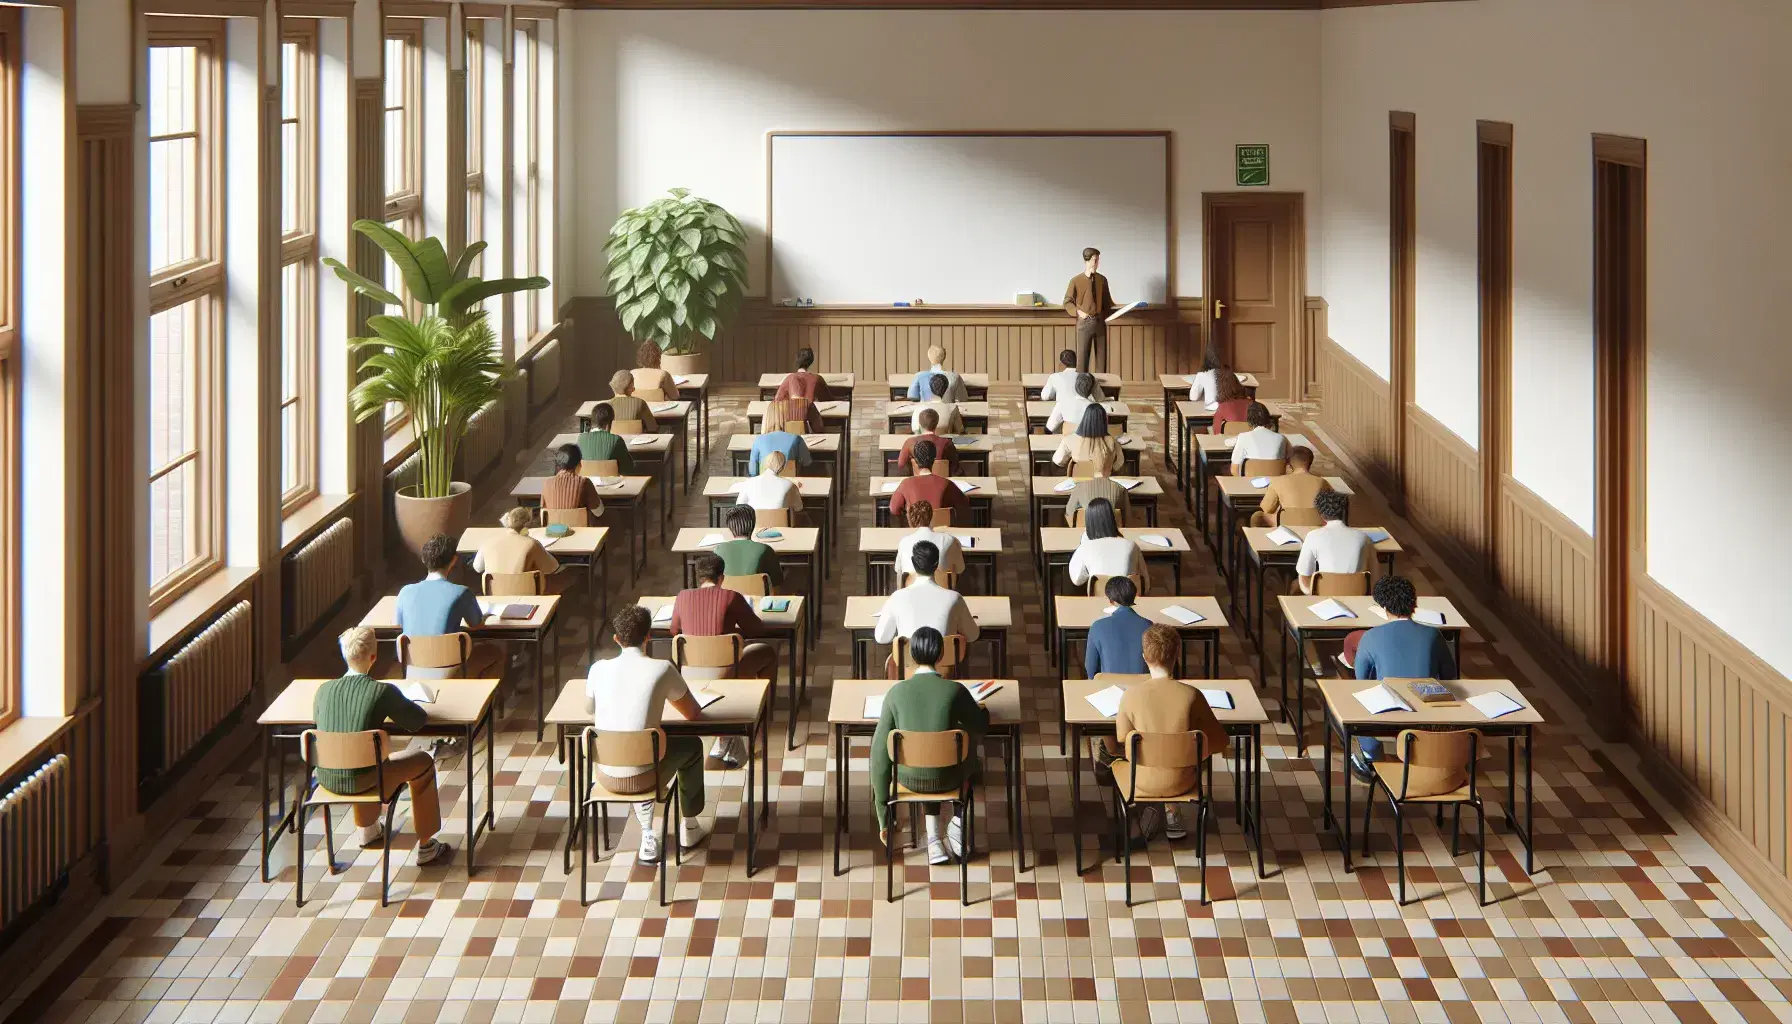 School classroom with multi-ethnic students sitting at desks and teacher in front of white board, green plant and natural light.